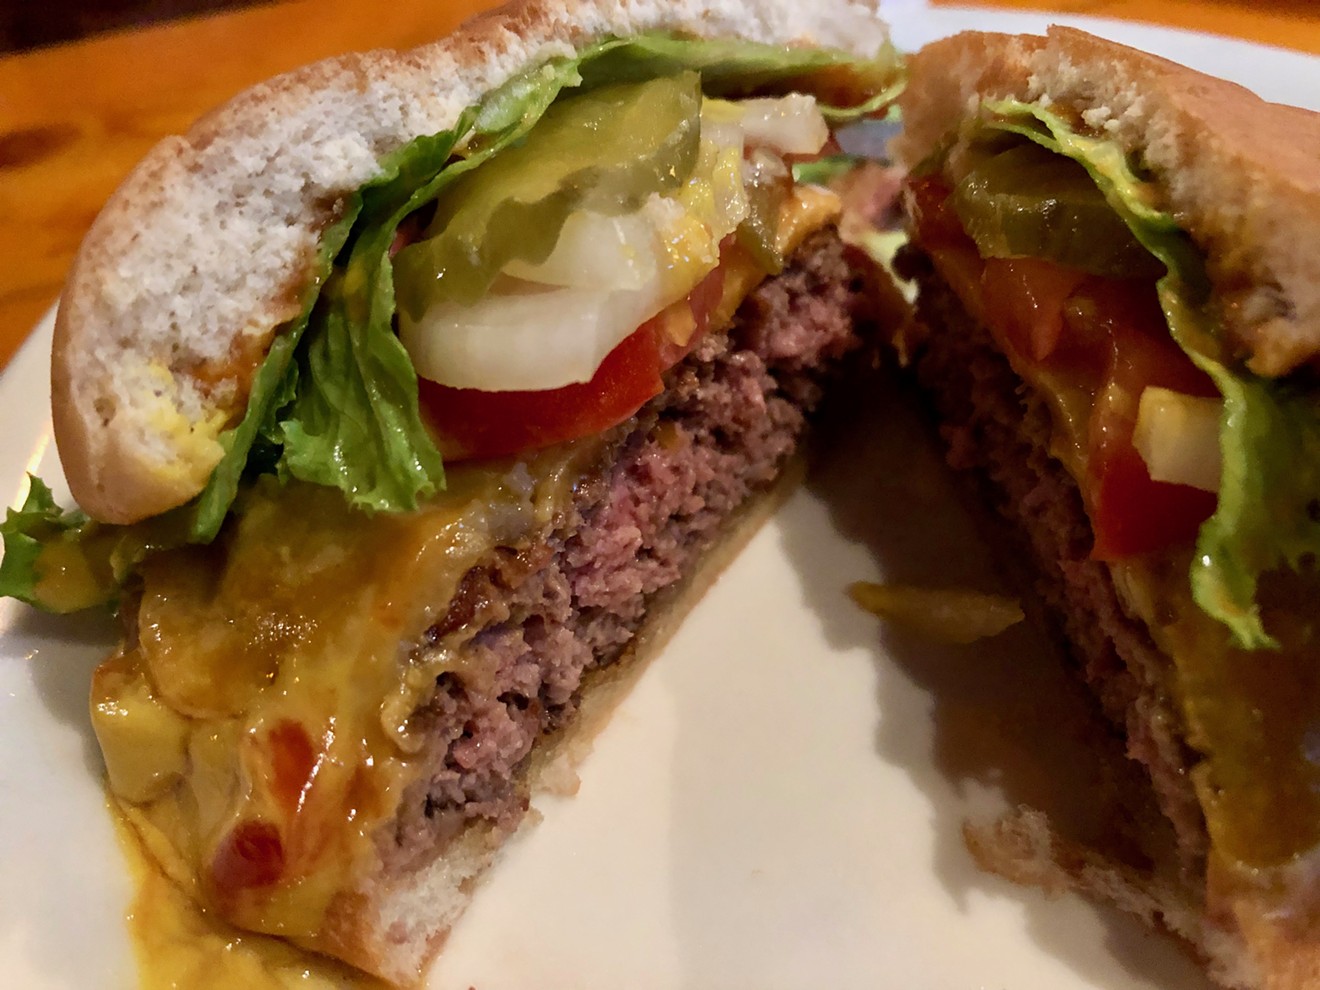 A look inside the Cheese Drummer burger at The Dirty Drummer.